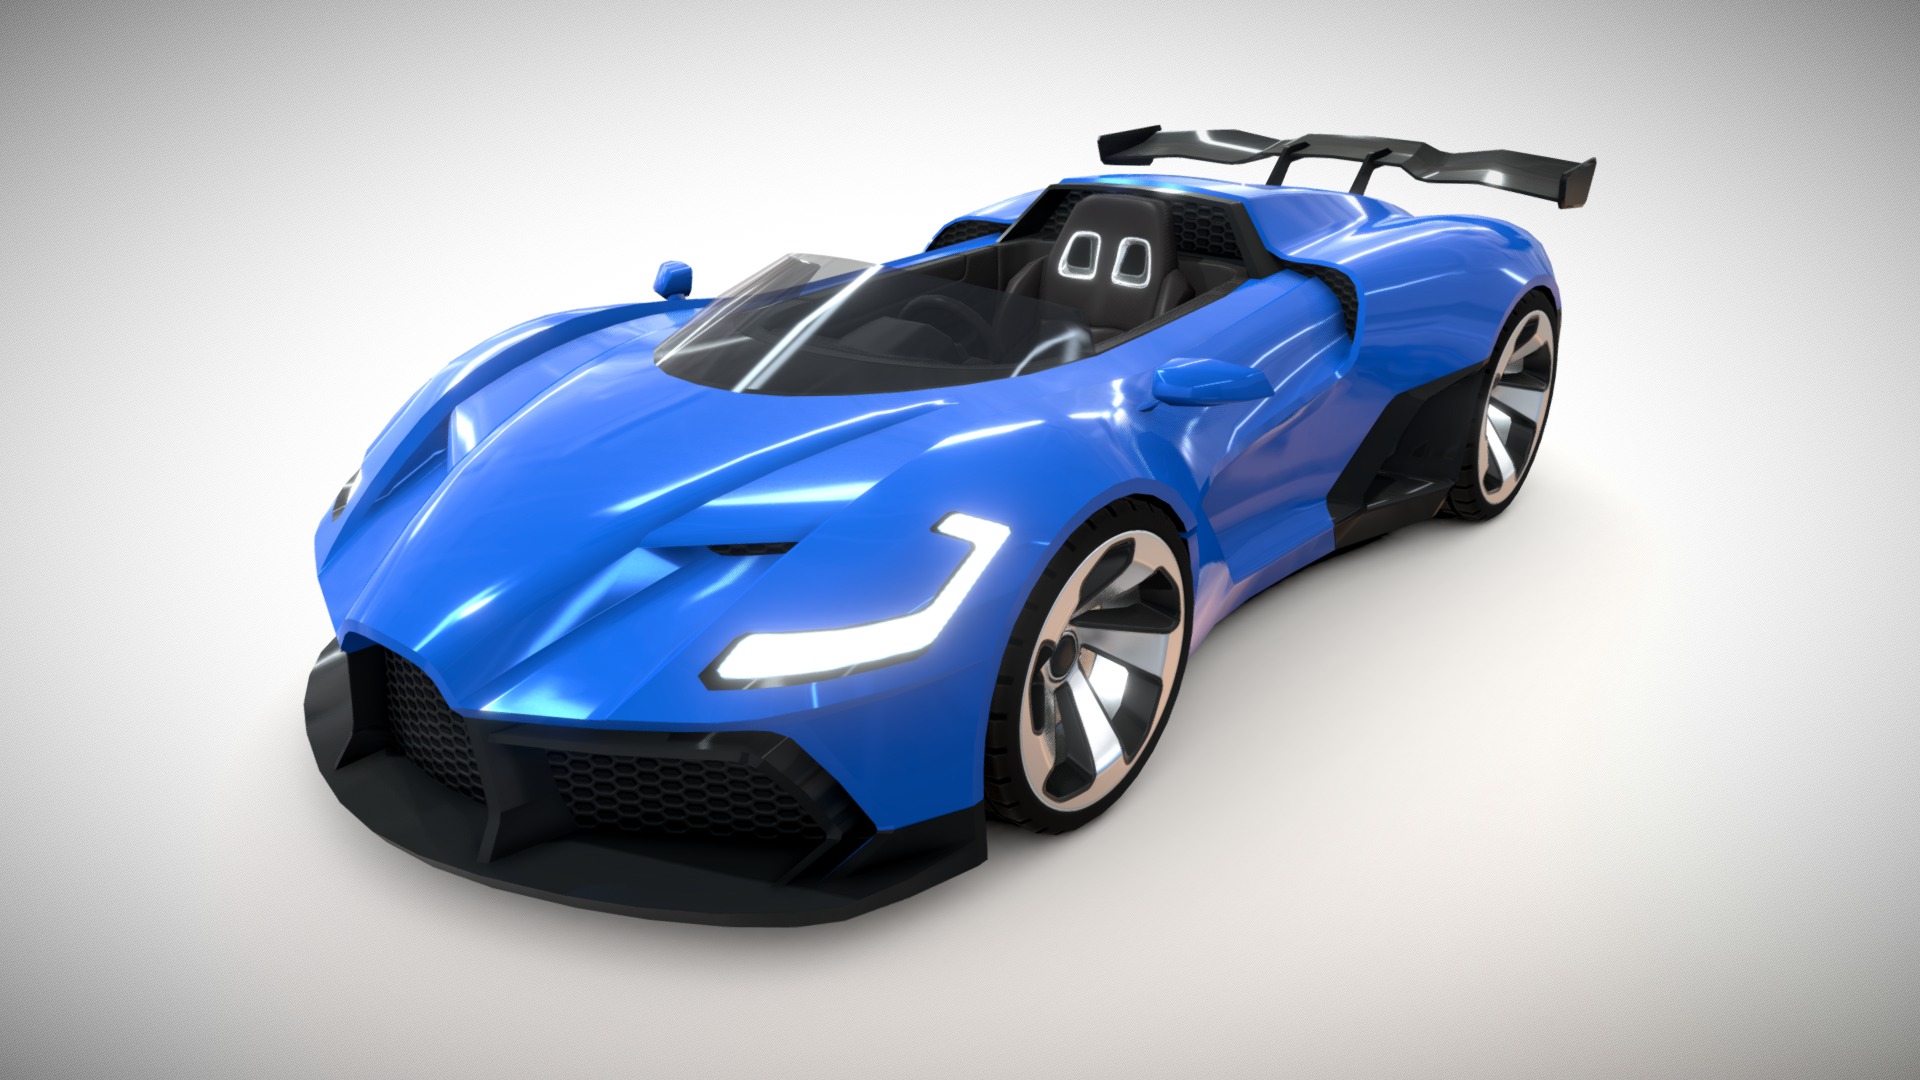 3D model Race Kart 07 - This is a 3D model of the Race Kart 07. The 3D model is about a blue sports car.